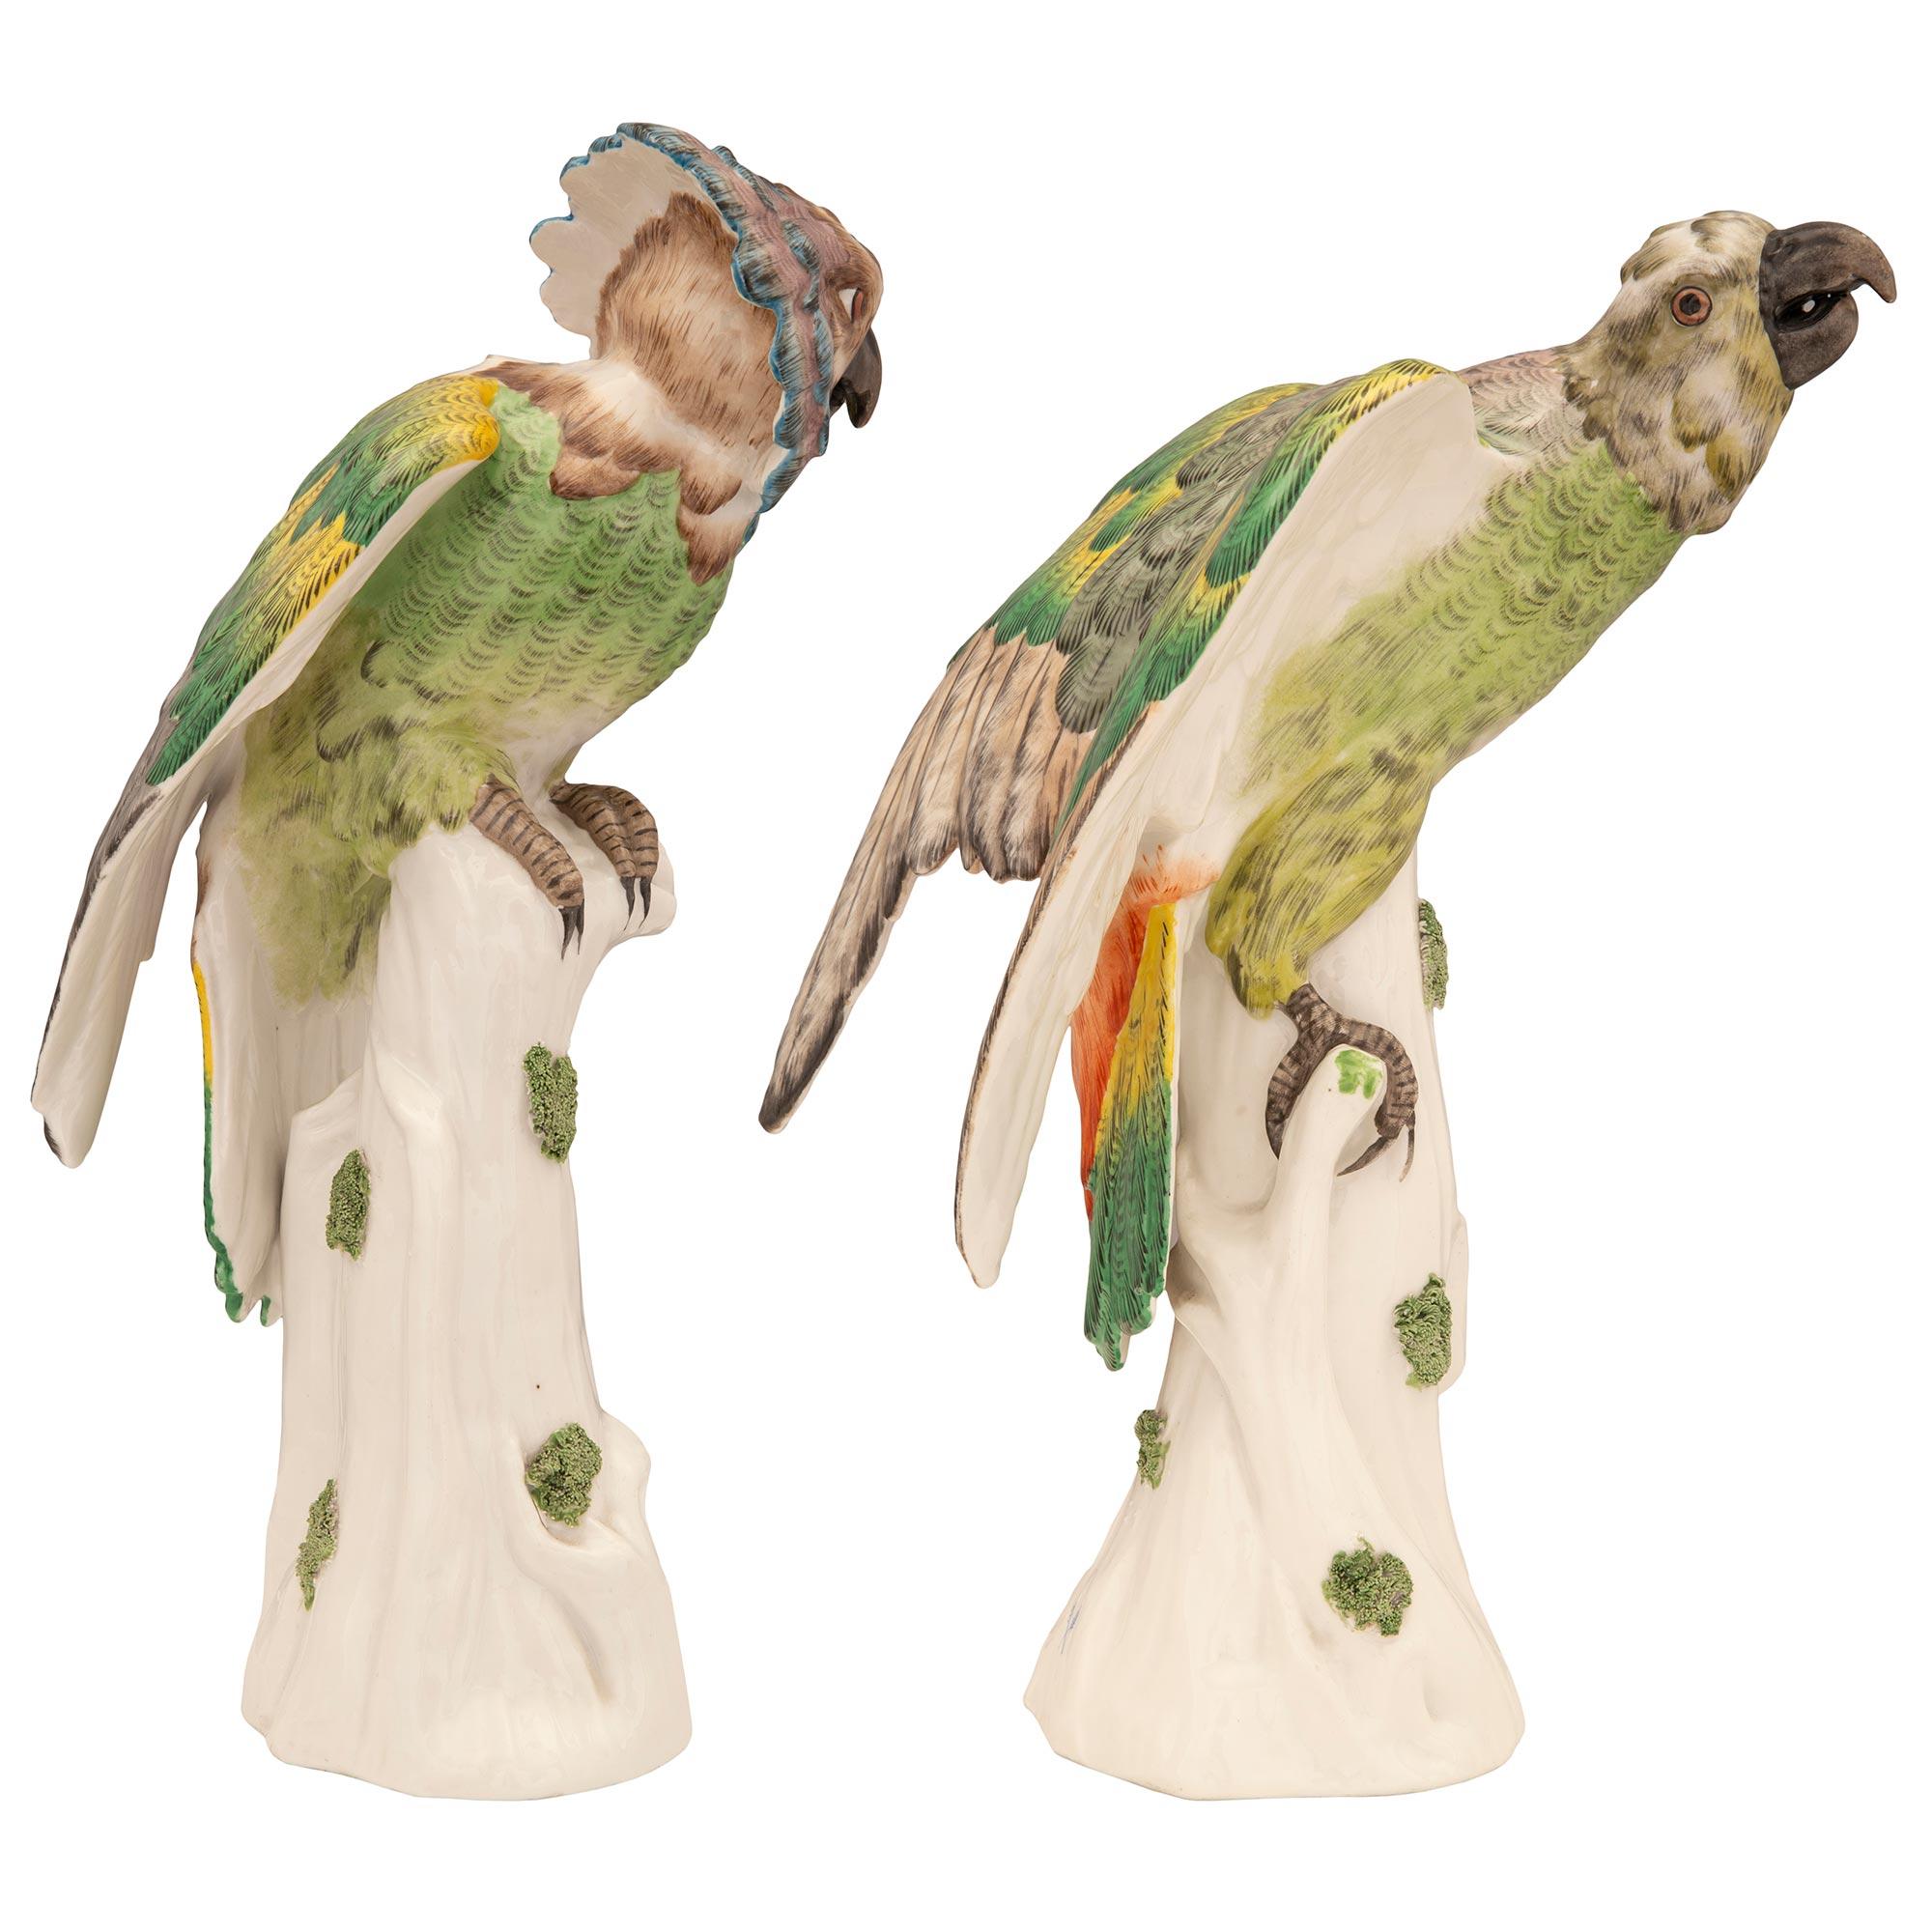 A striking and most charming true pair of French 18th century De La Courtille porcelain signed statues of hawk-headed parrots. Each wonderfully executed parrot is raised by a lovely trunk and branch designed base with charming moss growing on it.